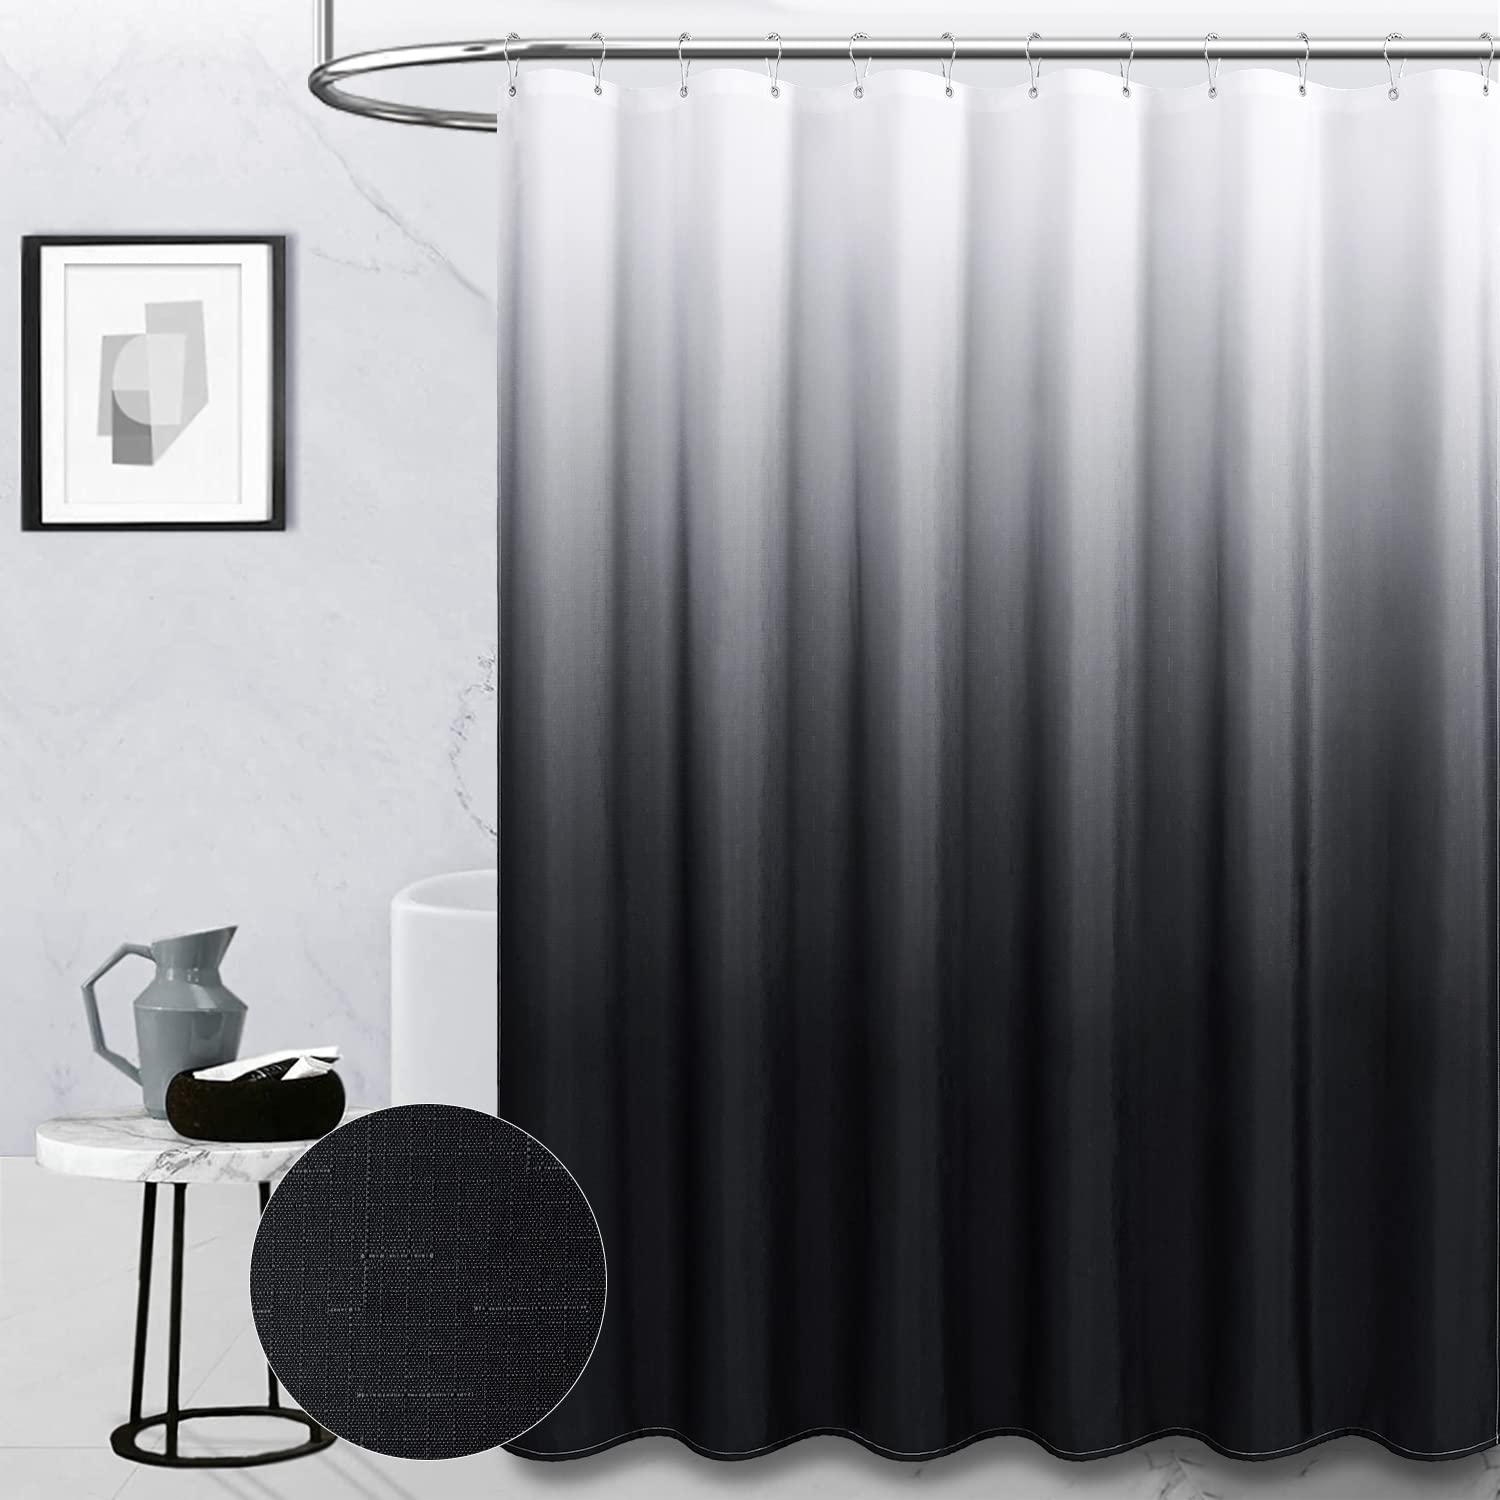 Bttn Extra Long Shower Curtain 72 X 96 Inch Ombre Linen Textured Heavy Duty Fabric Set With Plastic Hooks